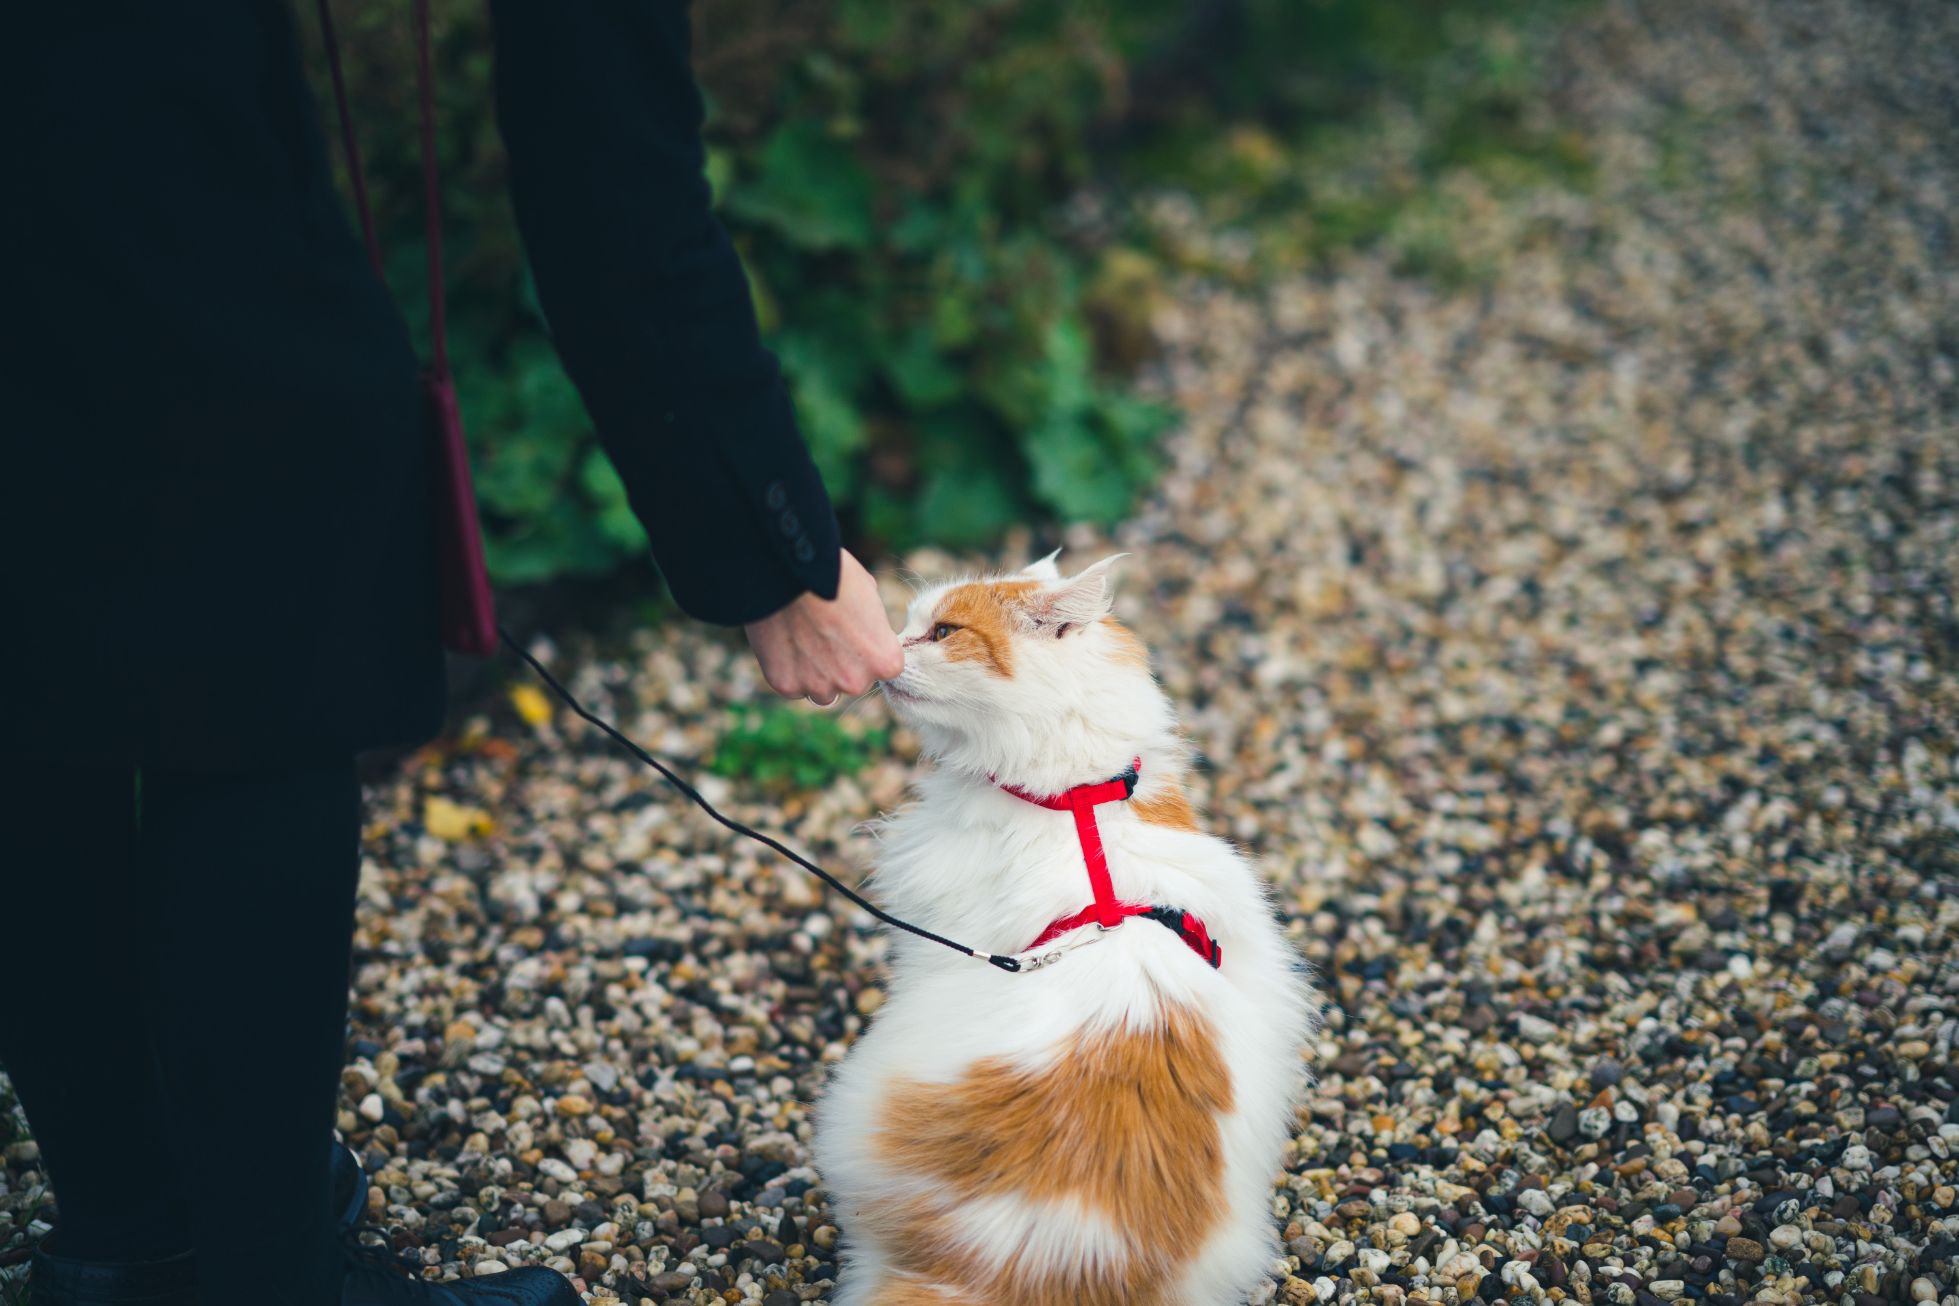 white and orange cat wearing a red harness sniffing a hand